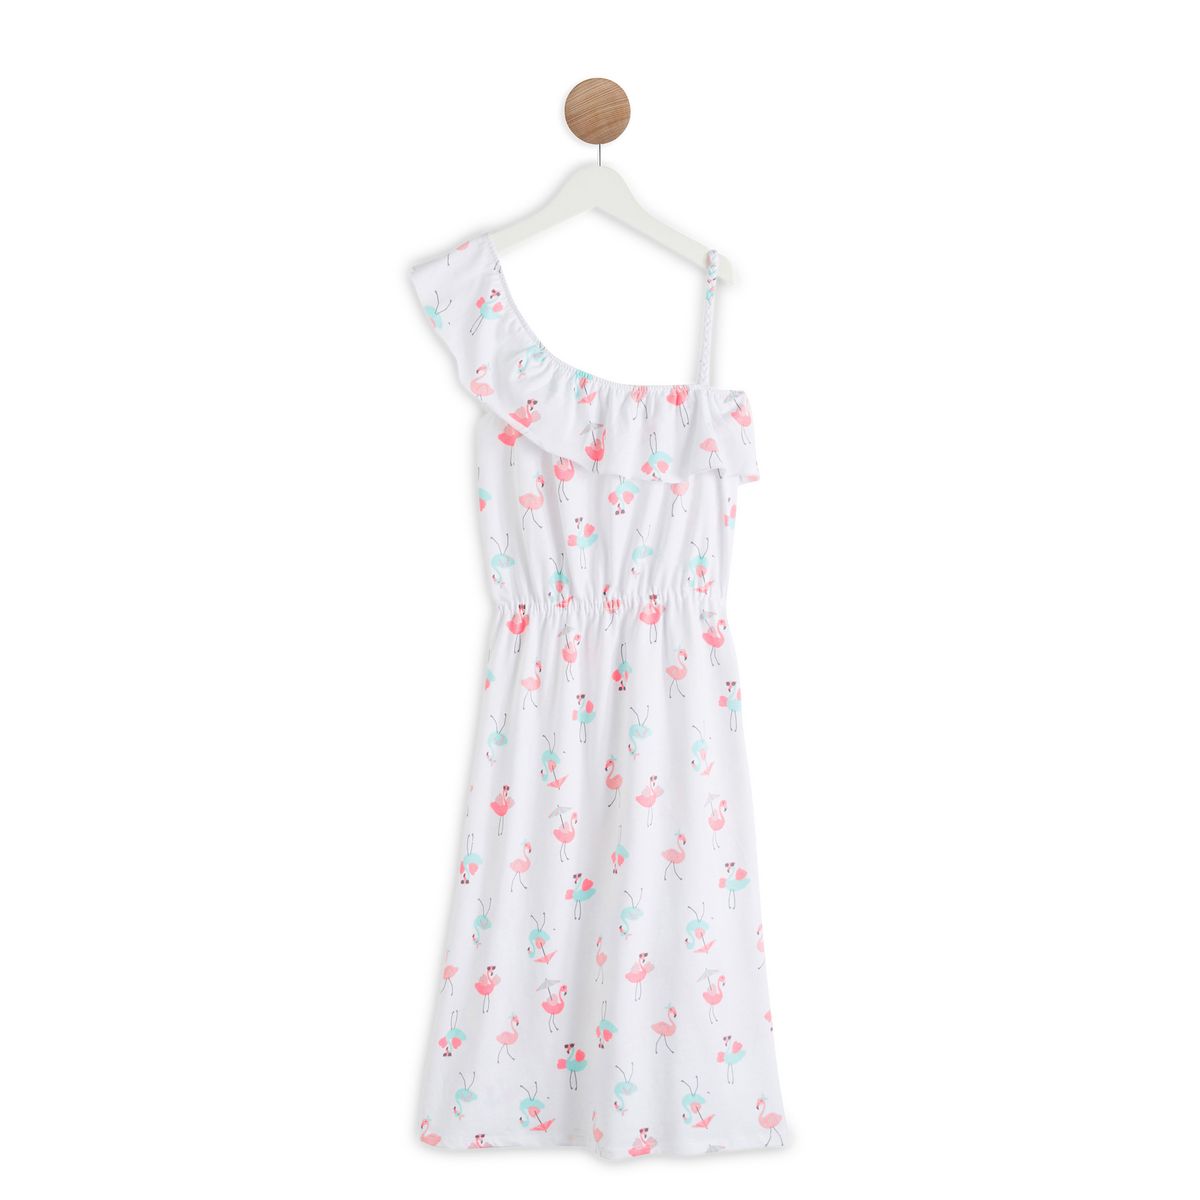 IN EXTENSO Robe longue flamants roses fille